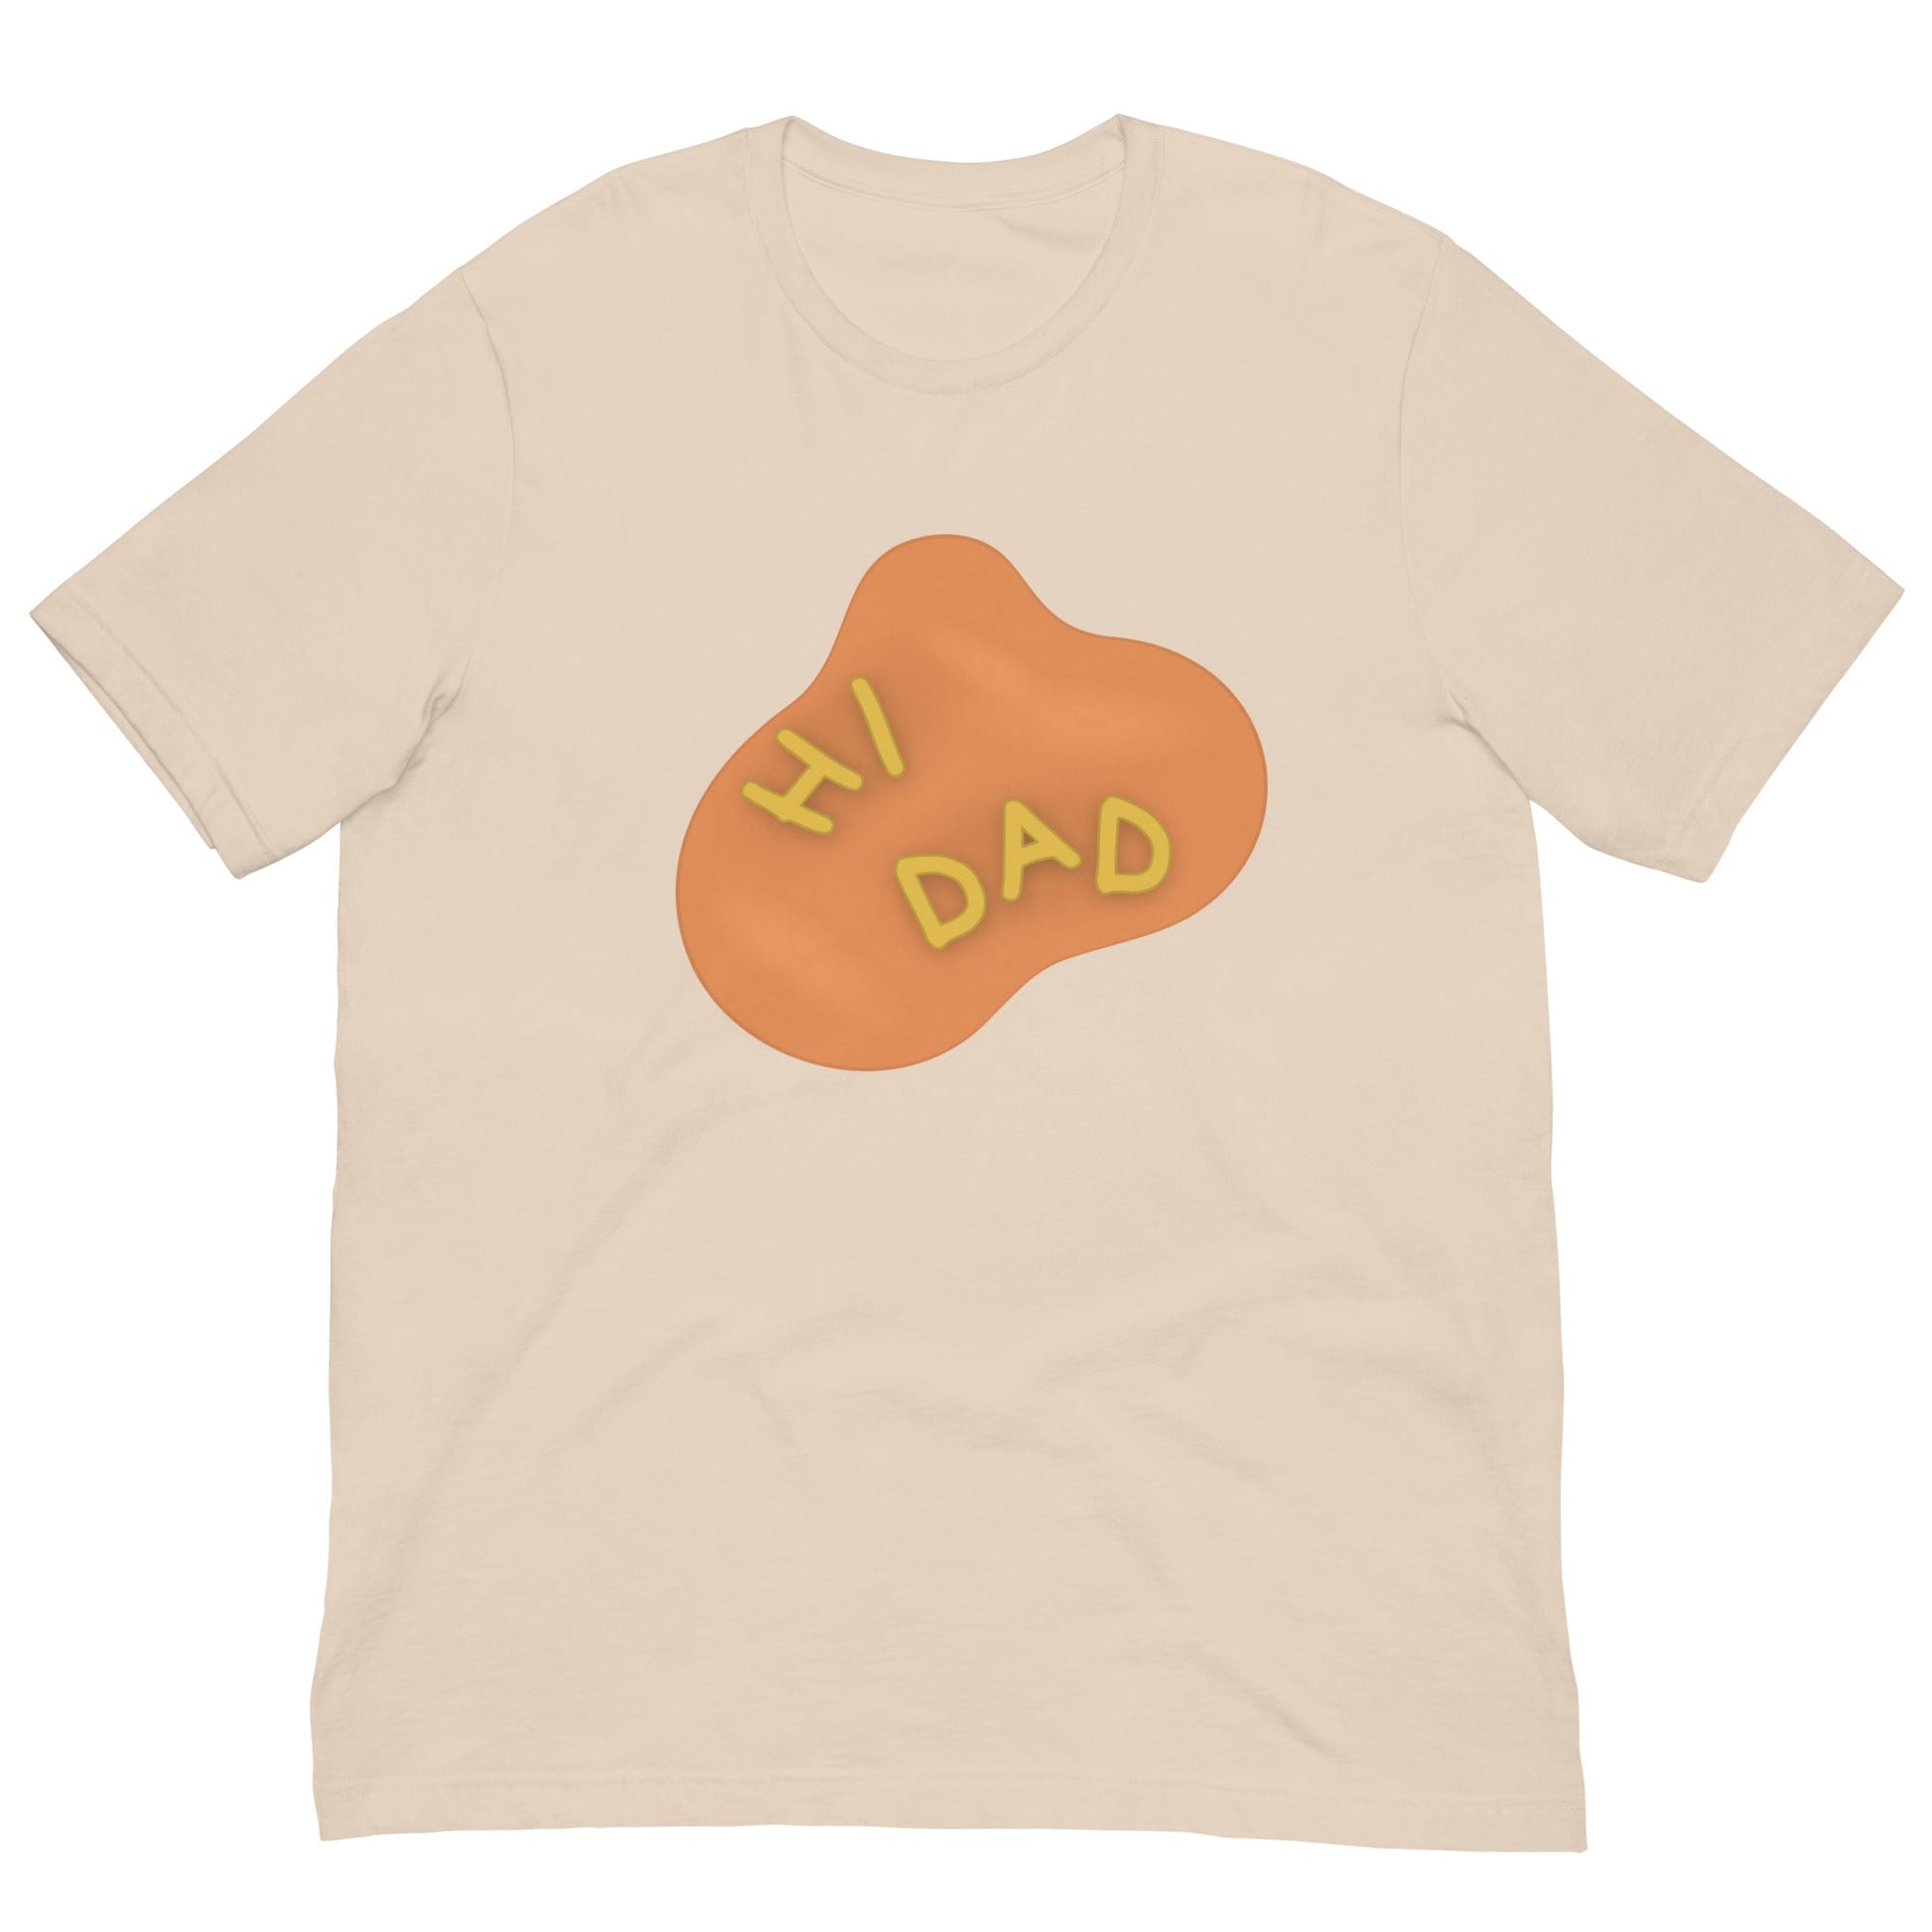 Hi Dad Soup Spill Unisex t-shirt 90s inspired90s movie kids tops90s movie top#tag4##tag5##tag6#